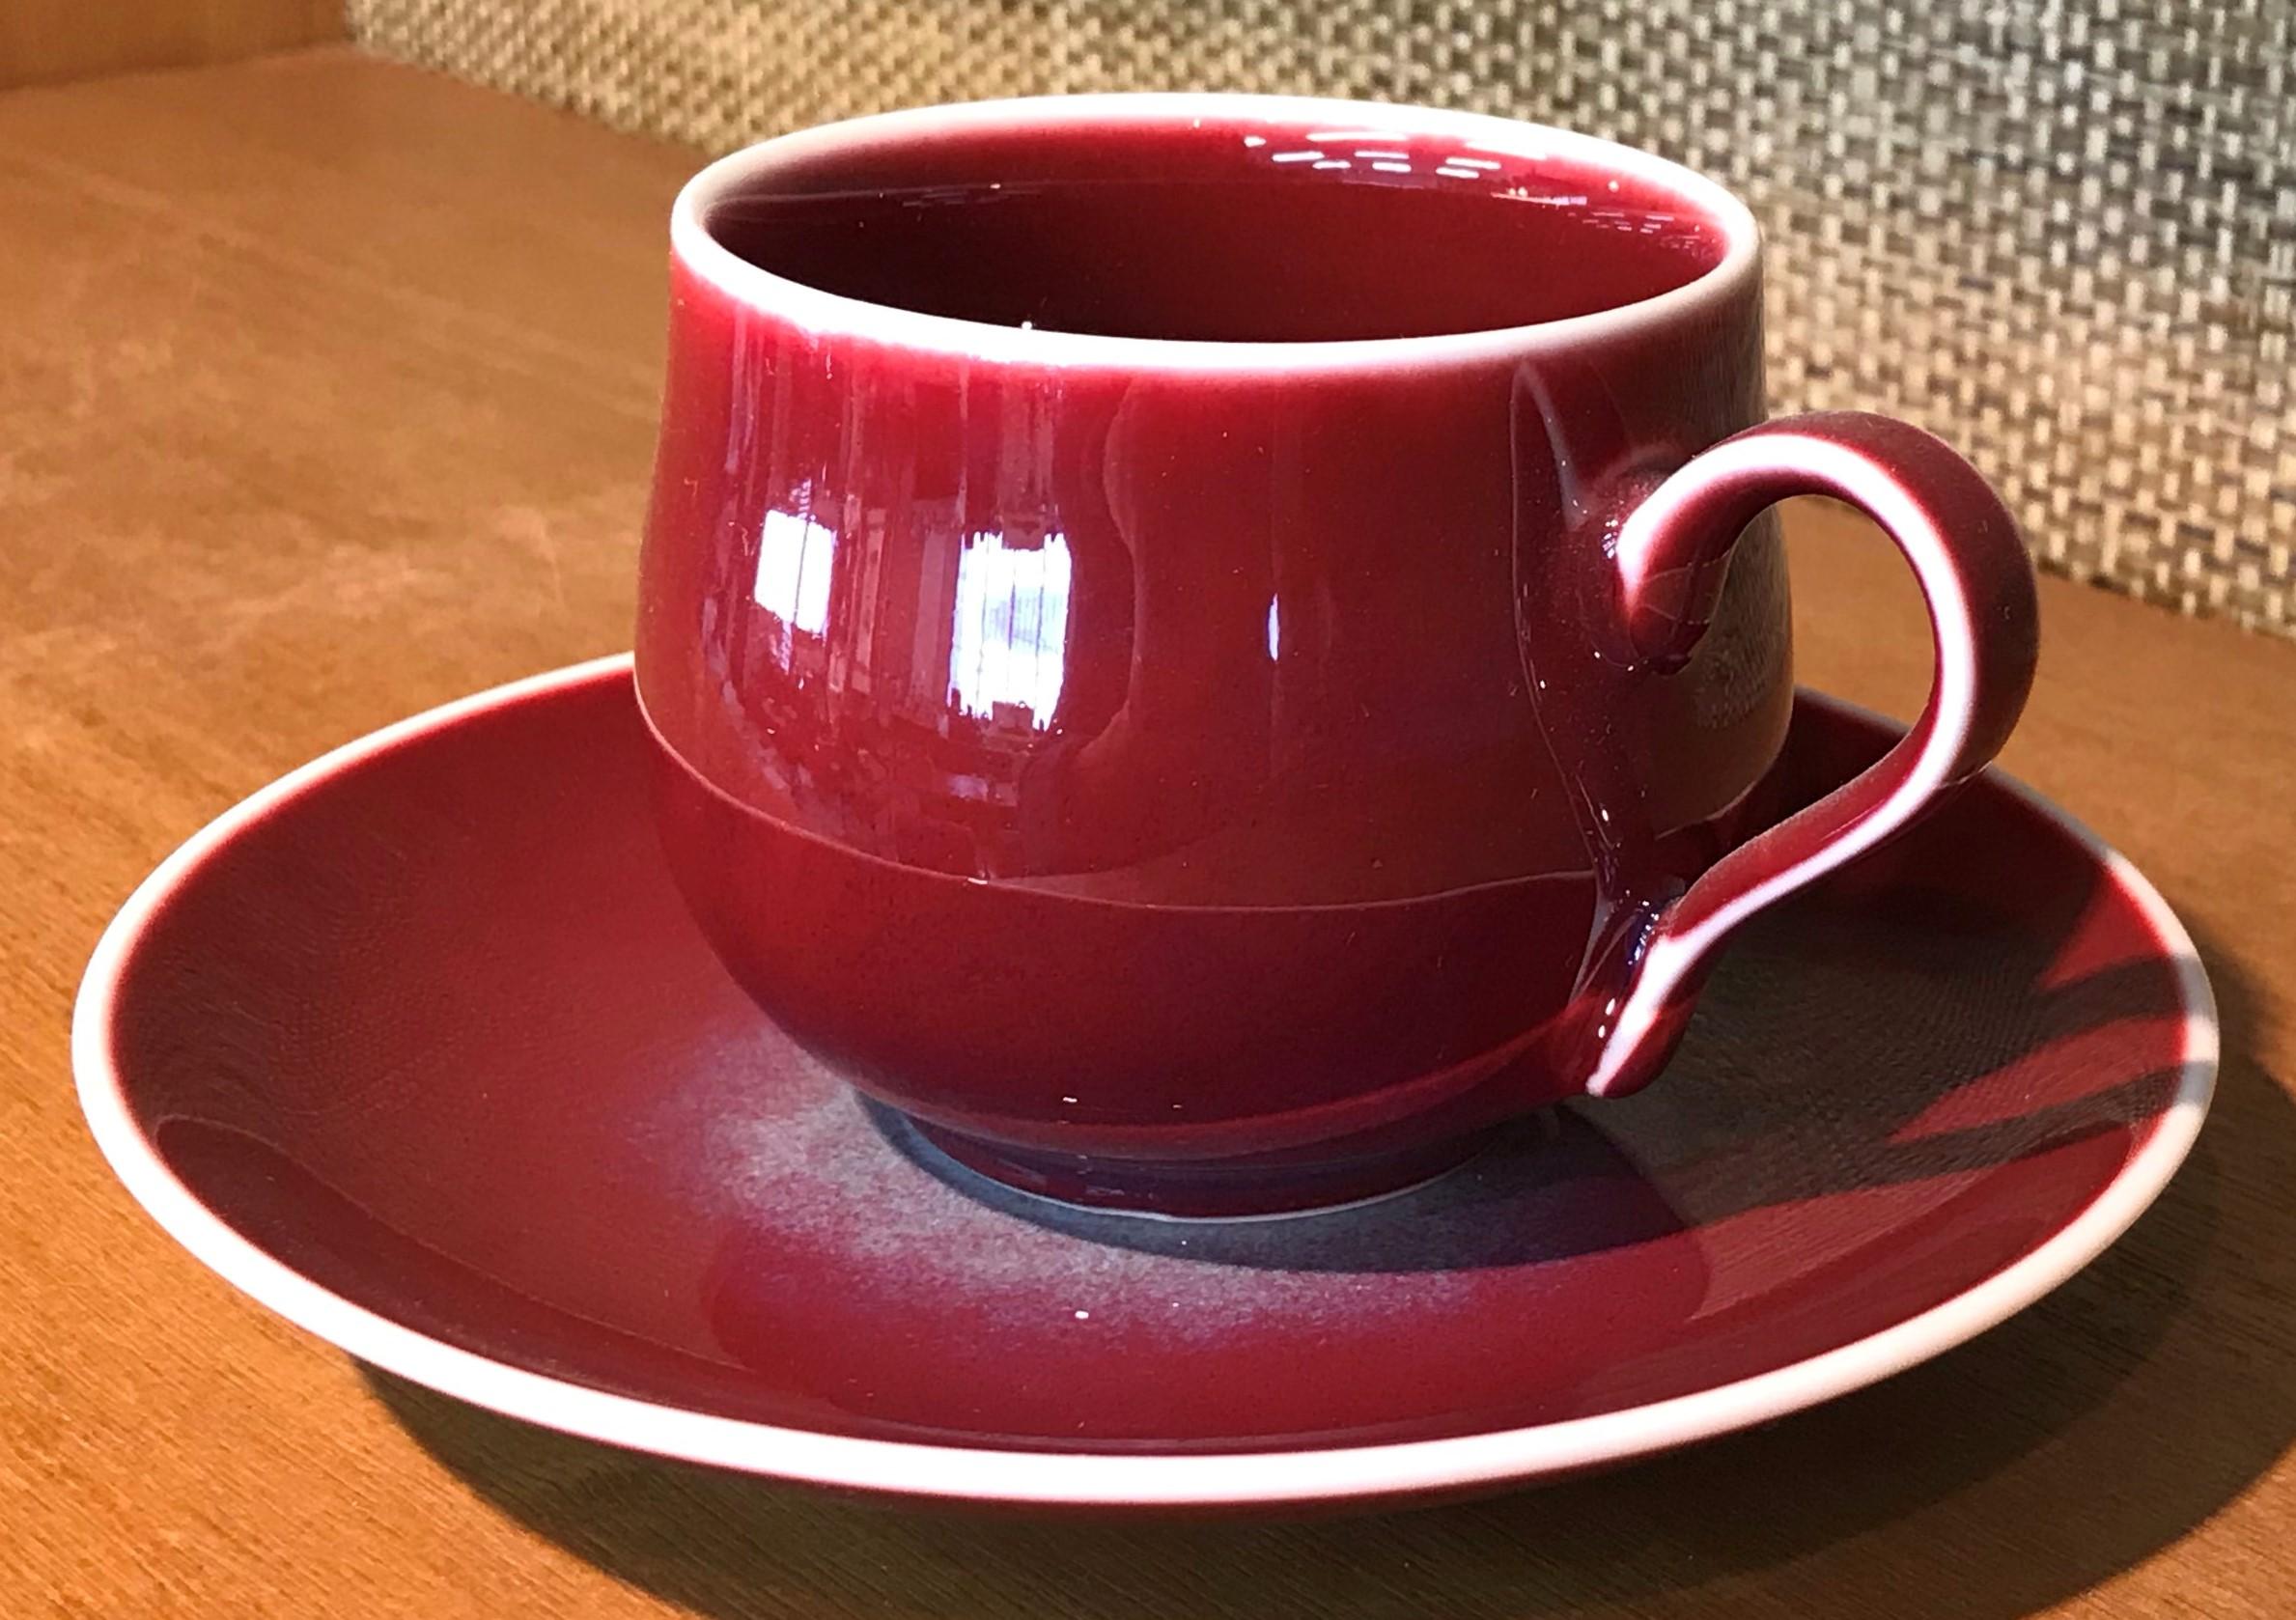 Exquisite contemporary Japanese porcelain cup and saucer, hand-glazed in stunning signature wine red, a signed work from an exclusive series of cups and saucers by highly acclaimed award-winning master porcelain artist from the Imari-Arita region of